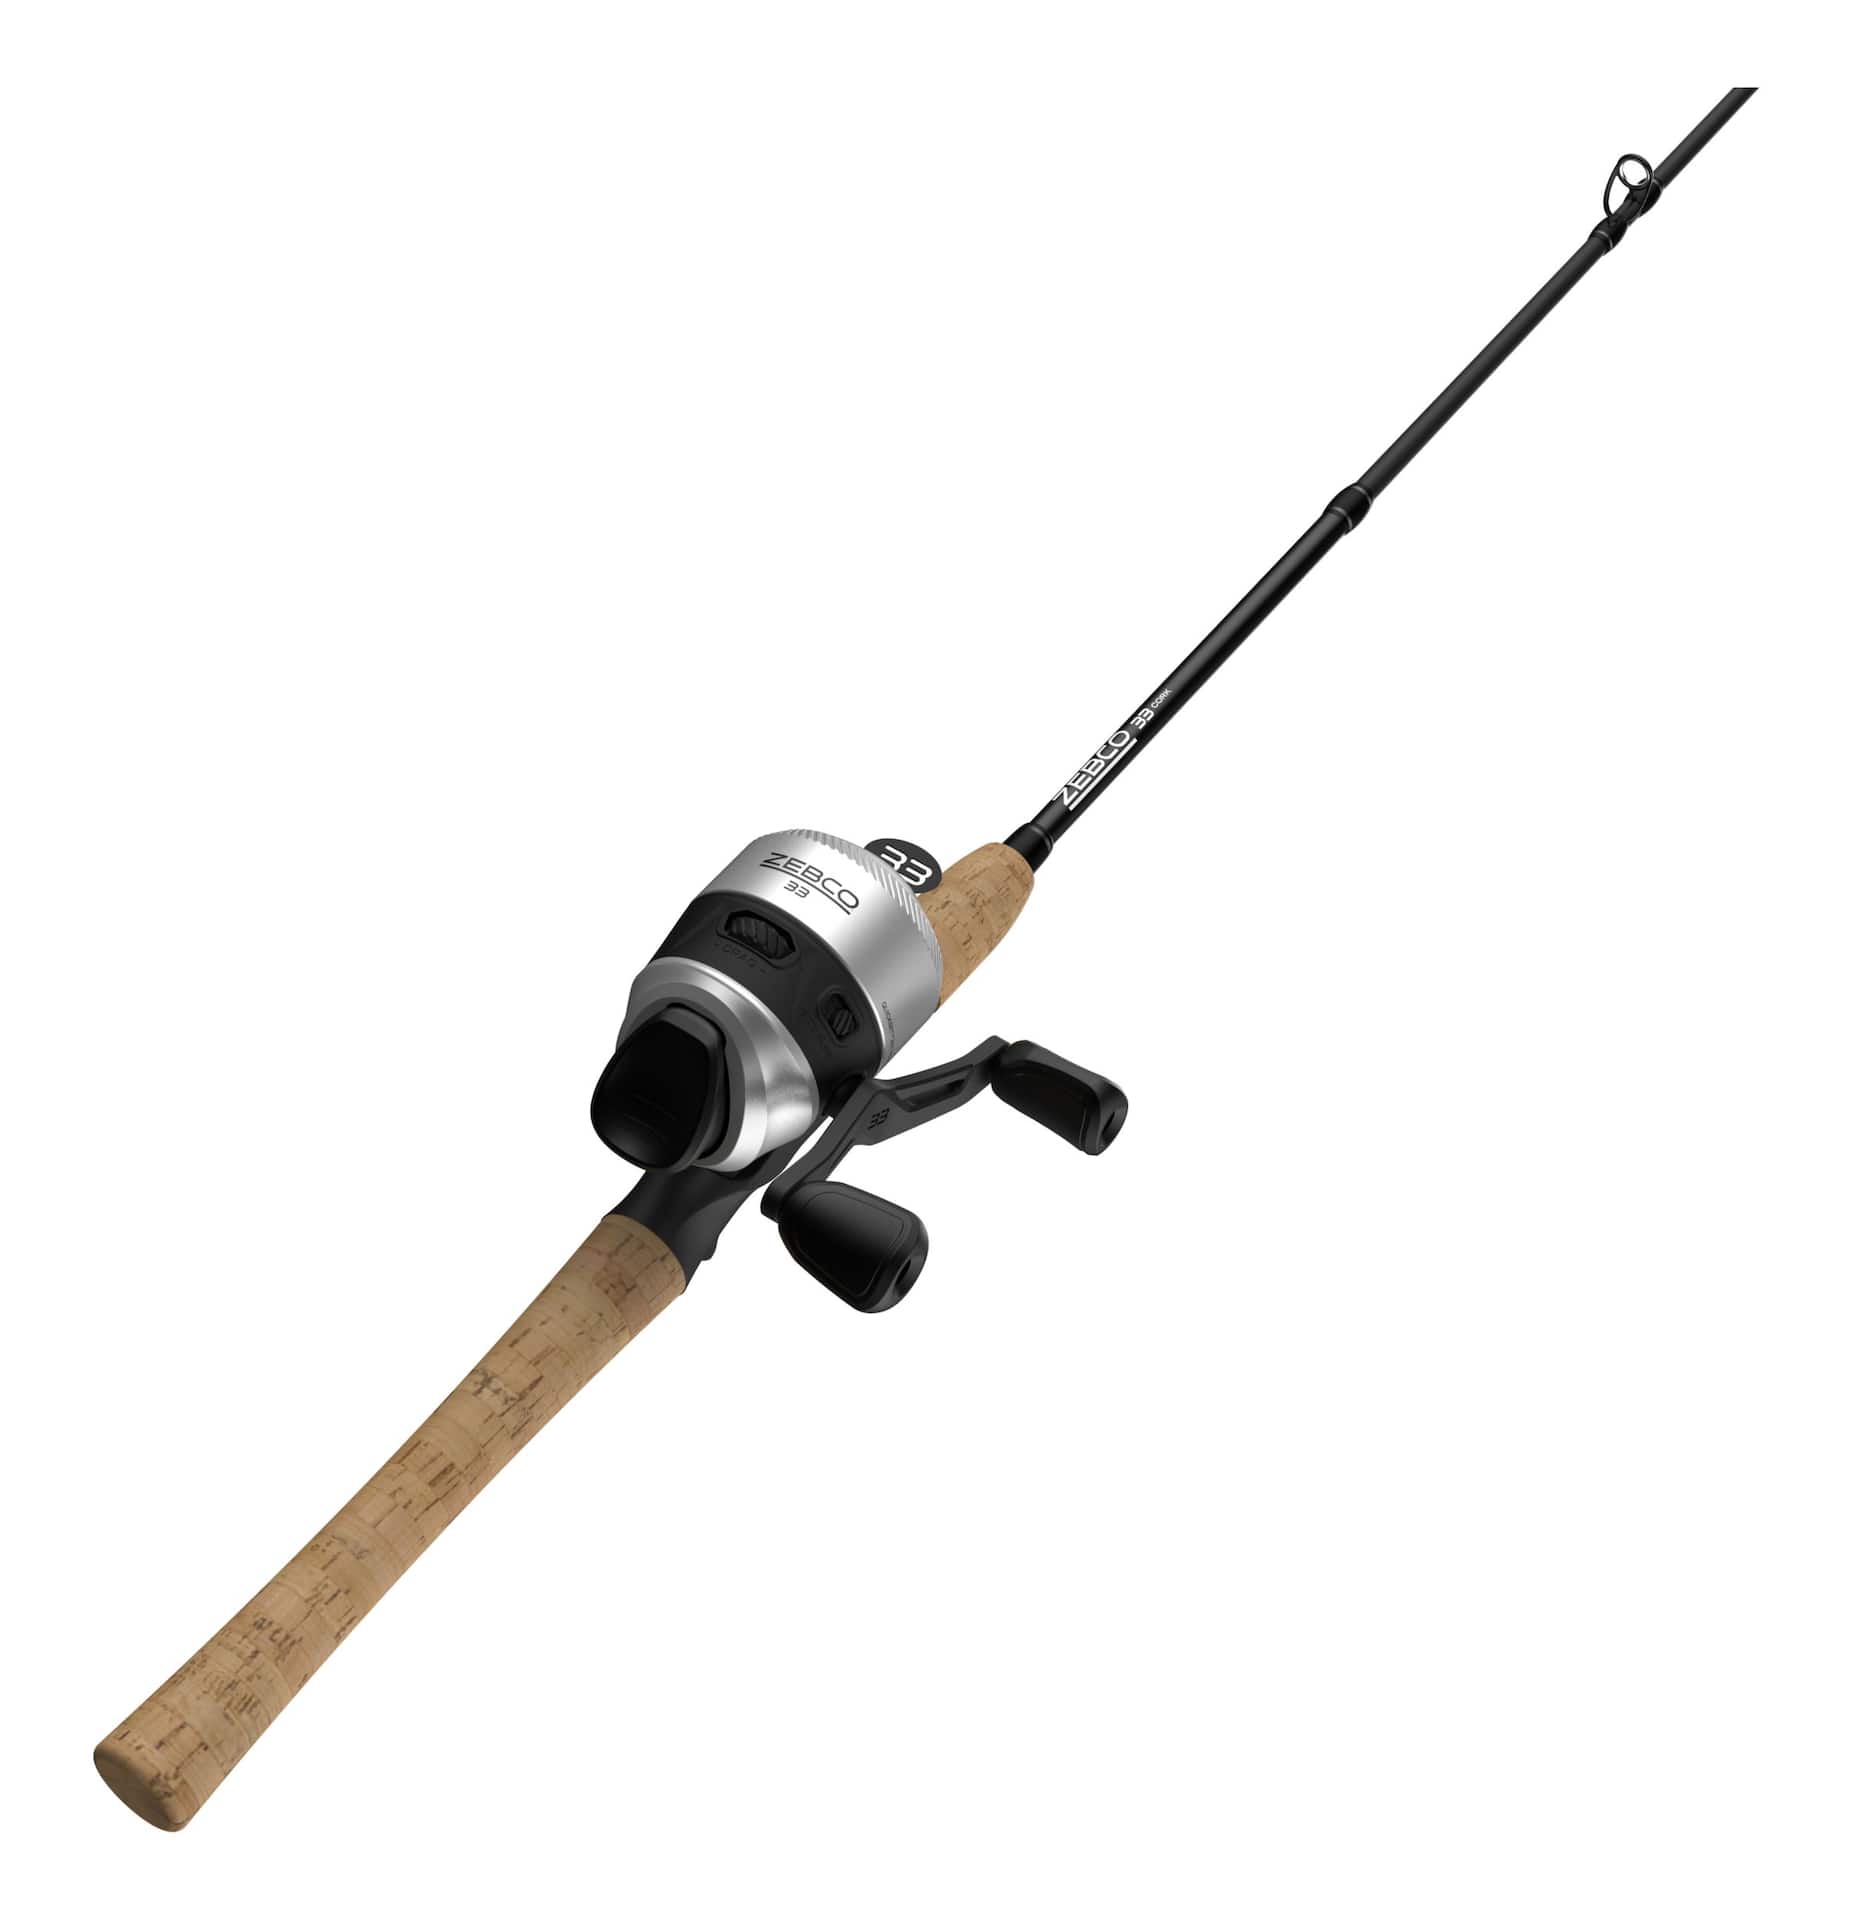  Zebco 33 Rhino Max Spincast Reel and Fishing Rod Combo, 6-Foot  6-Inch 2-Piece Durable Fiberglass Rod with ComfortGrip Handle, Quickset  Anti-Reverse Fishing Reel with Bite Alert, Gray/Black : Sports 